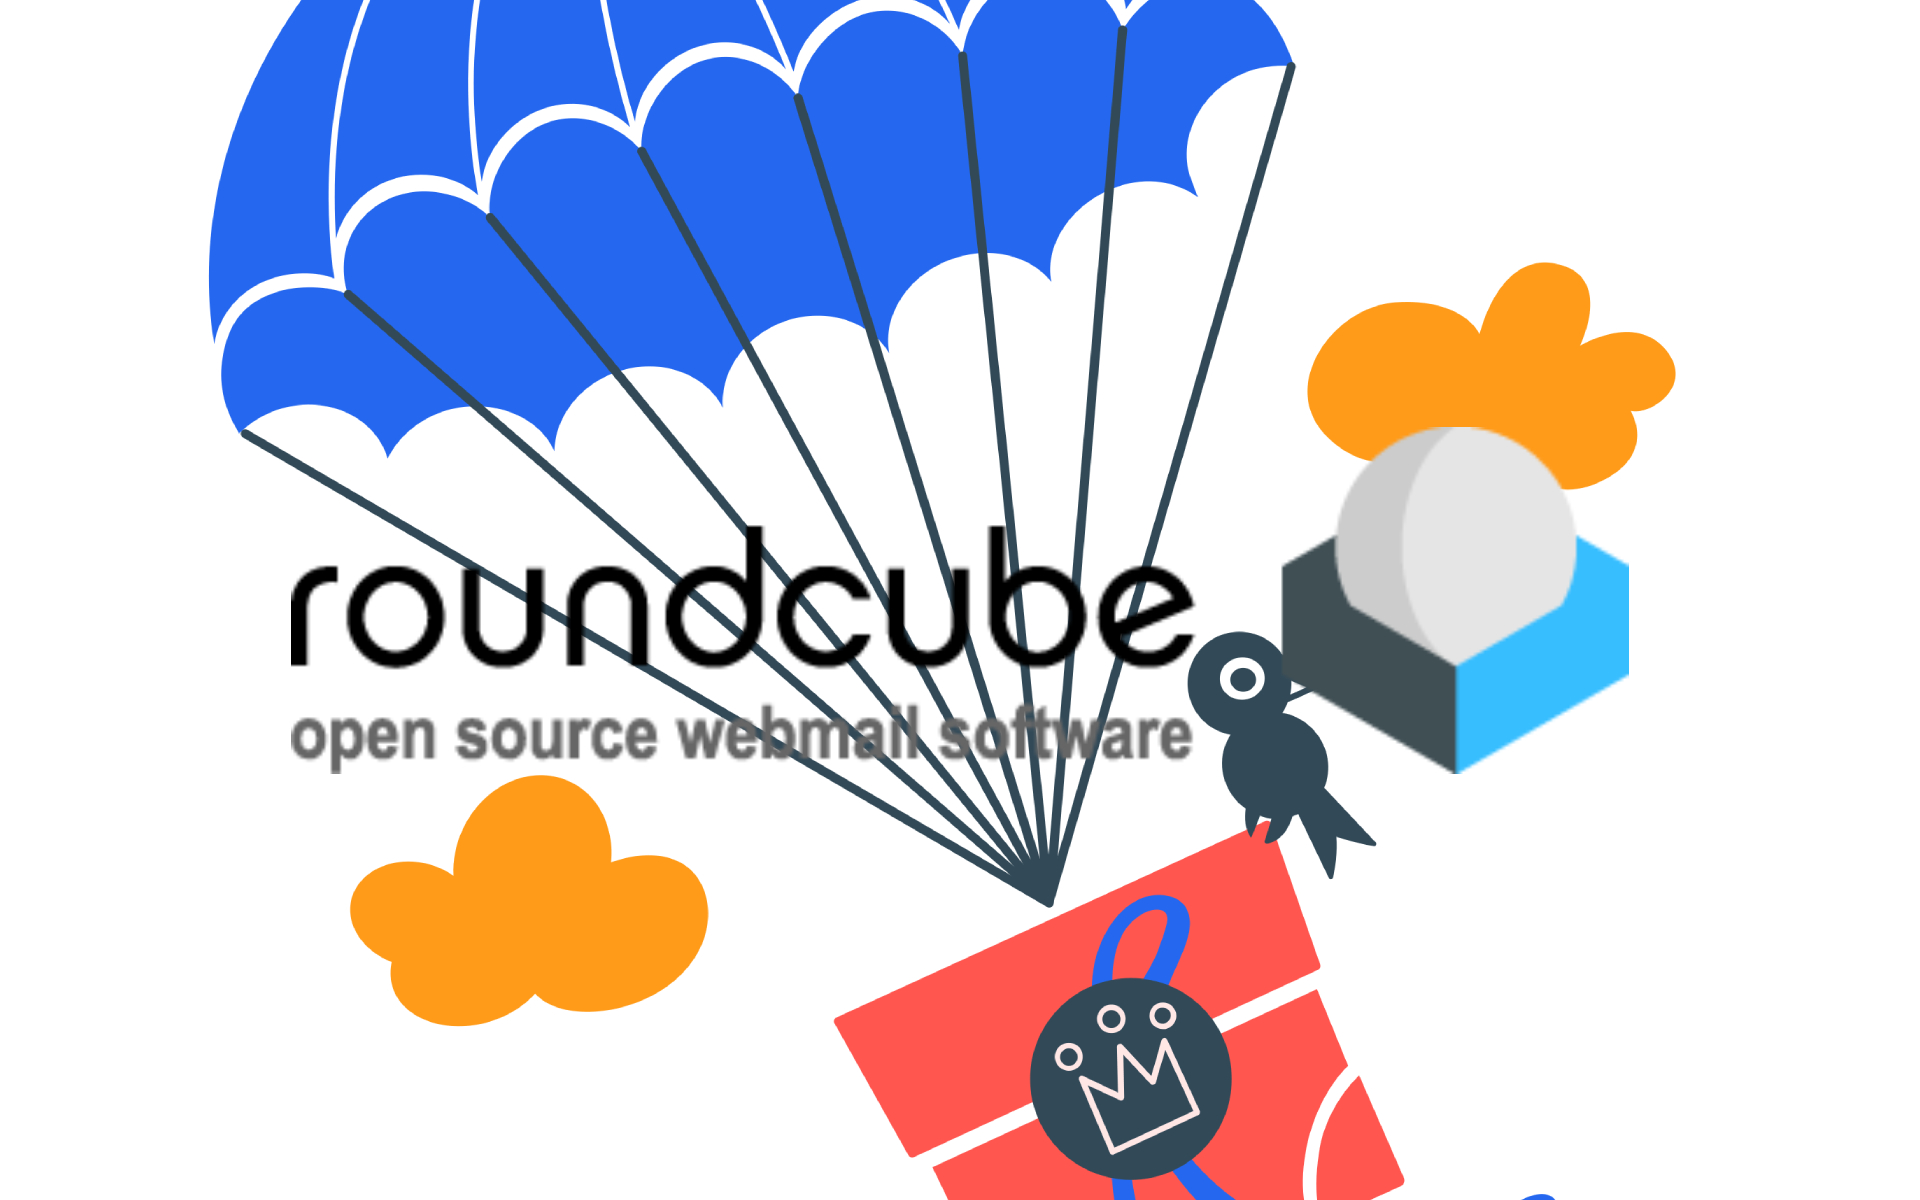 Roundecube webmail is replacing Horde webmail on cPanel & WHM version 108